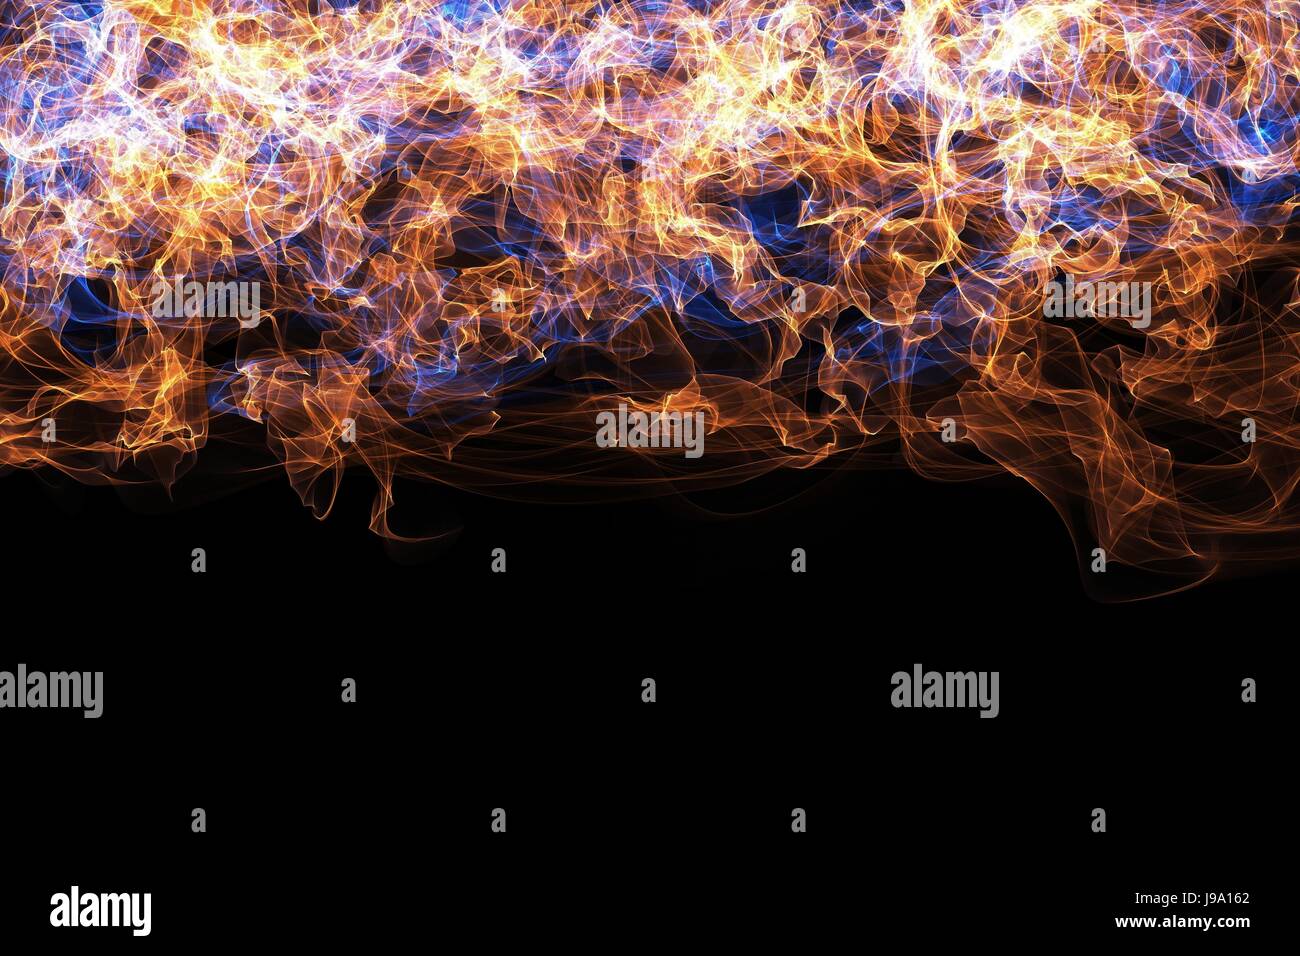 graphic, fire, conflagration, flame, layout, backdrop, background, burn, Stock Photo